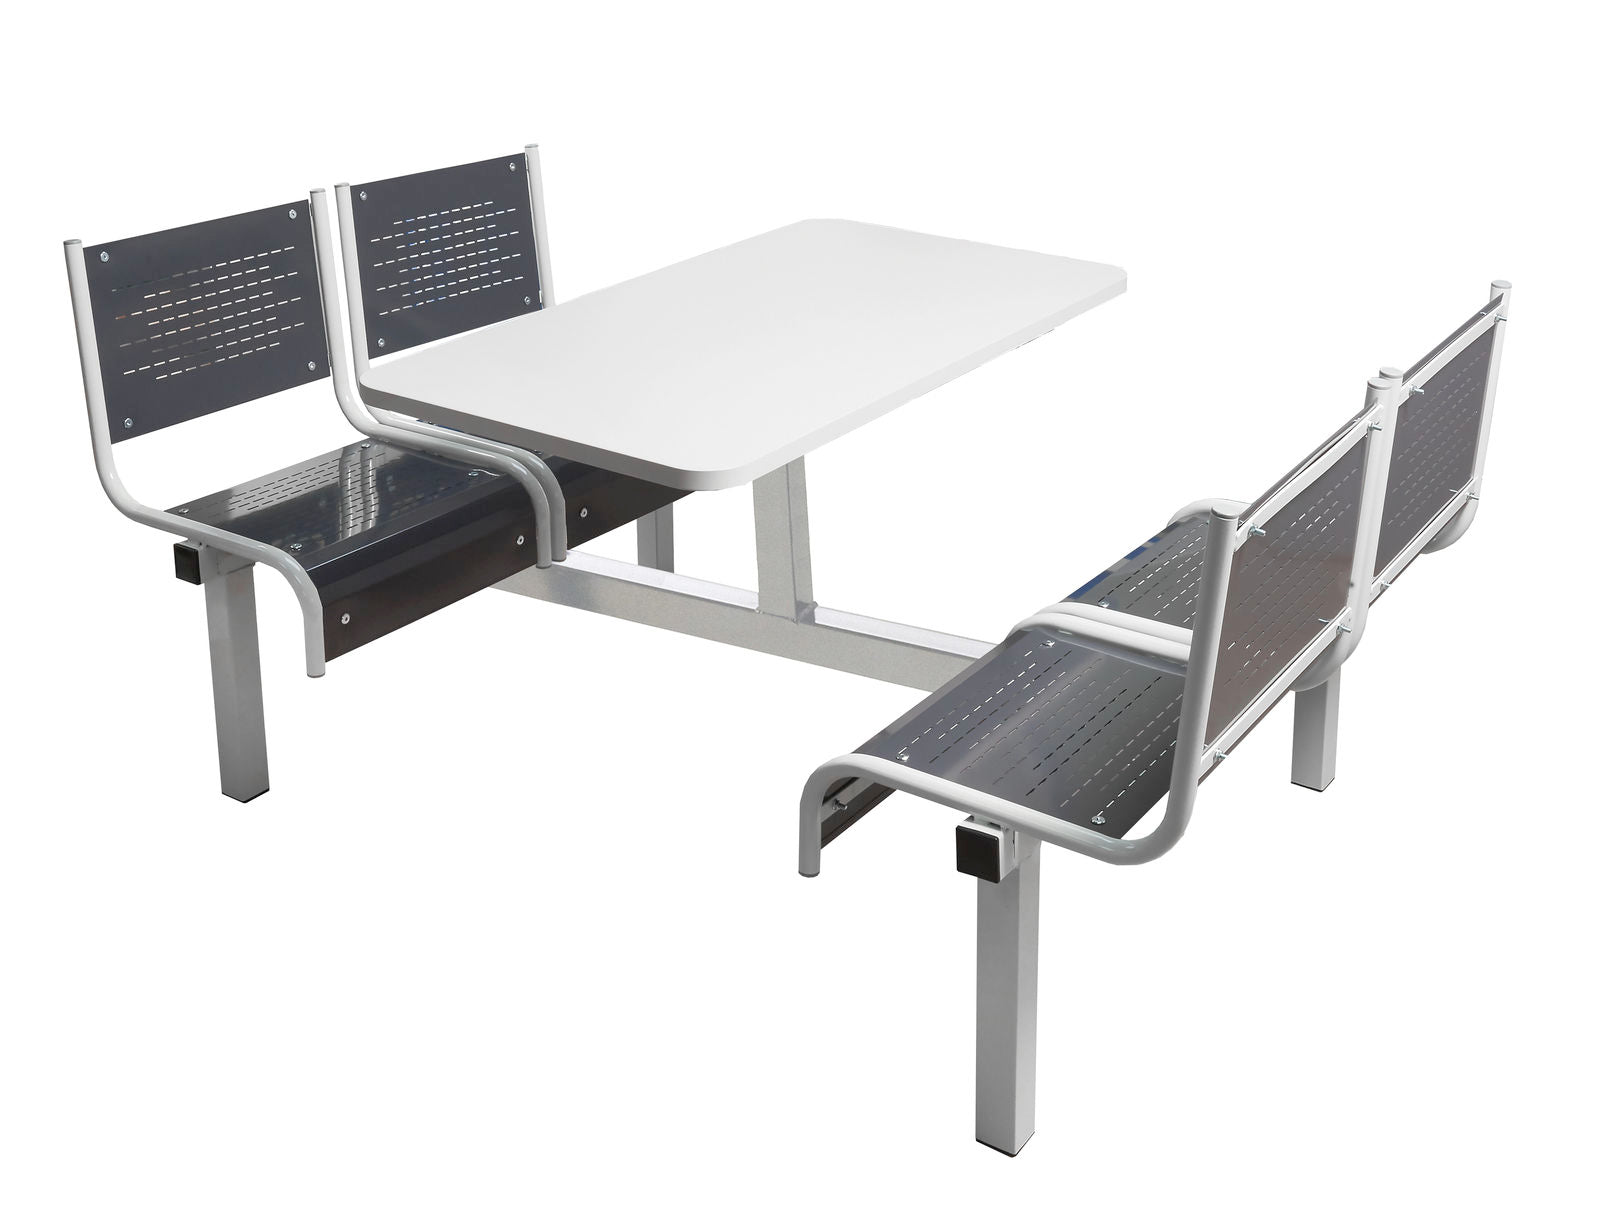 Spectrum 4 Seater Canteen Furniture Double Entry with Dark Grey Seats Canteen Furniture > Seating > Tables > QMP One Stop For Safety   